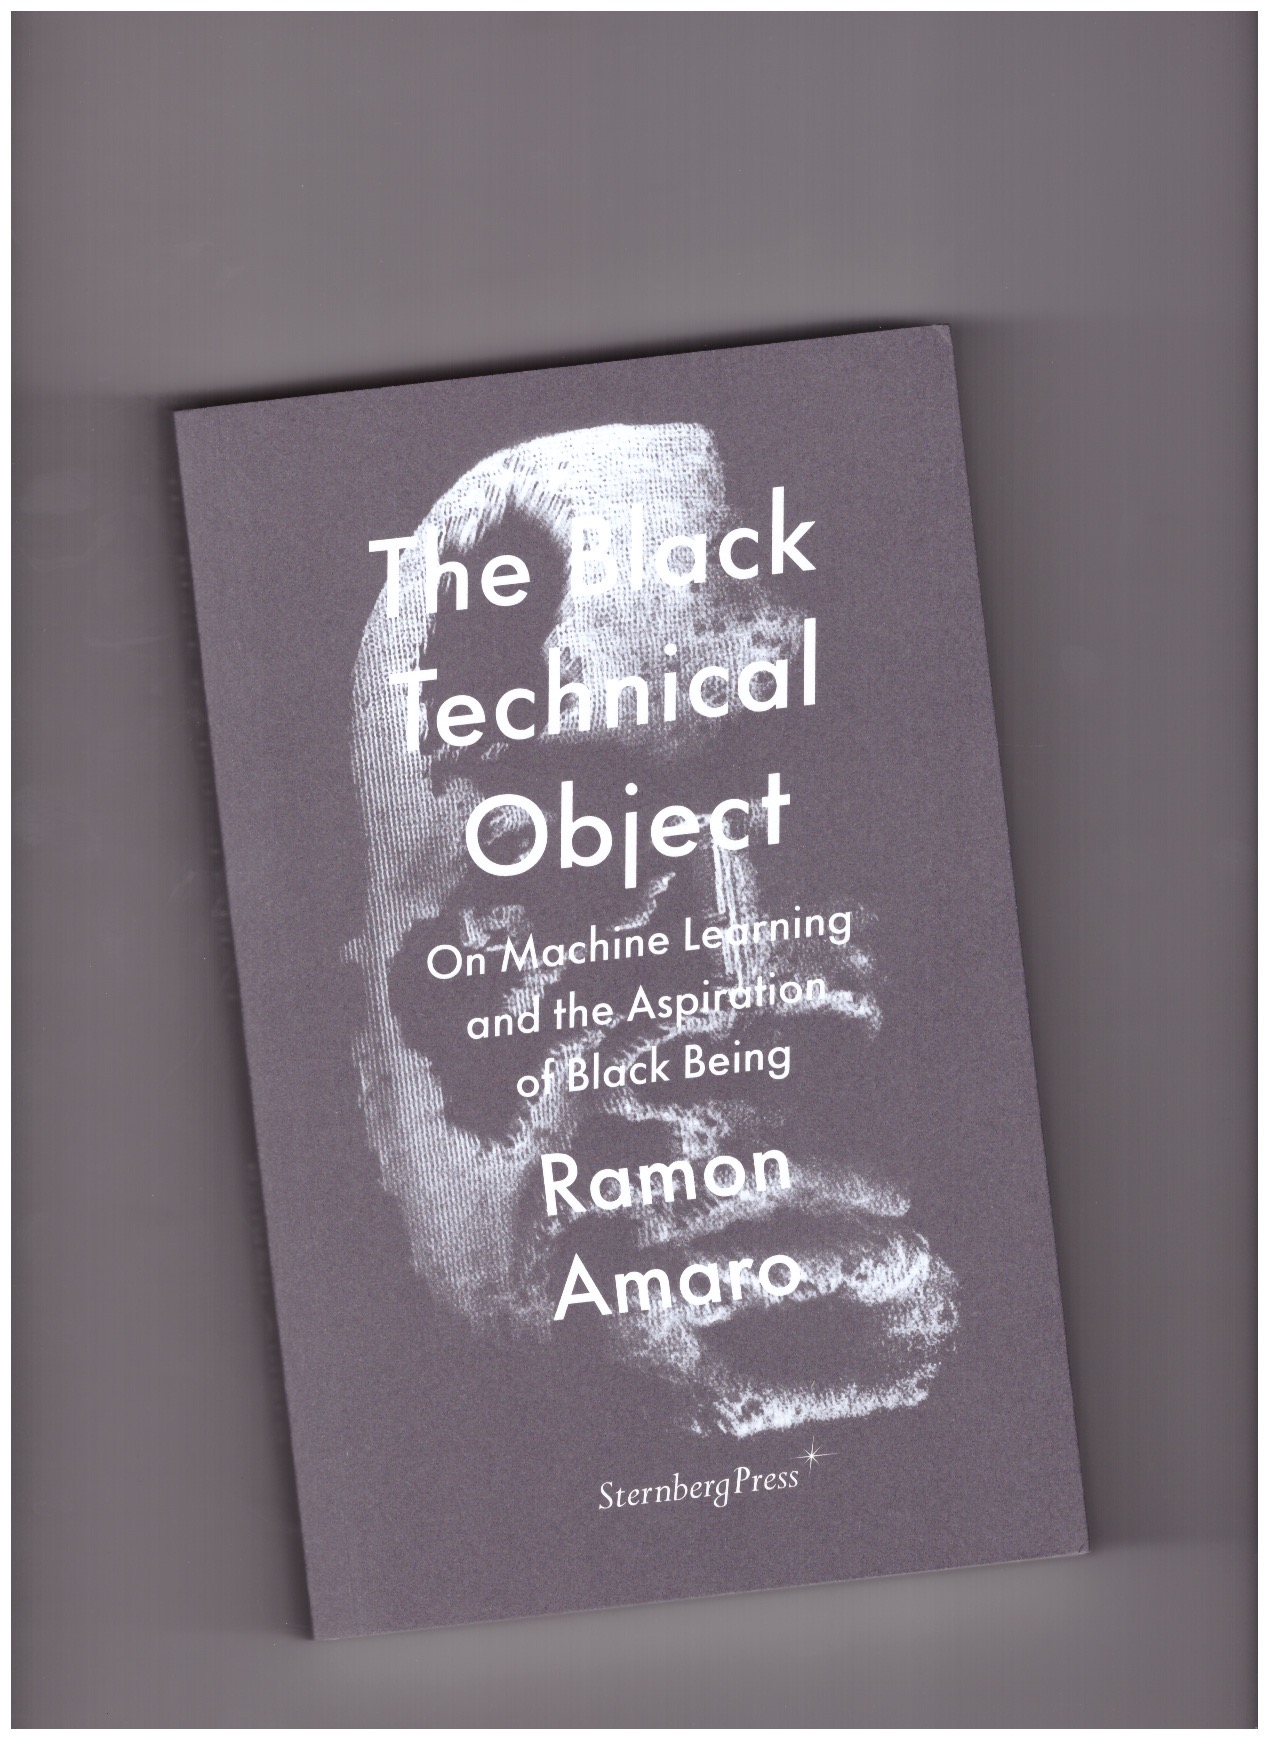 AMARO, Ramon - The Black Technical Object – On Machine Learning and the Aspiration of Black Being